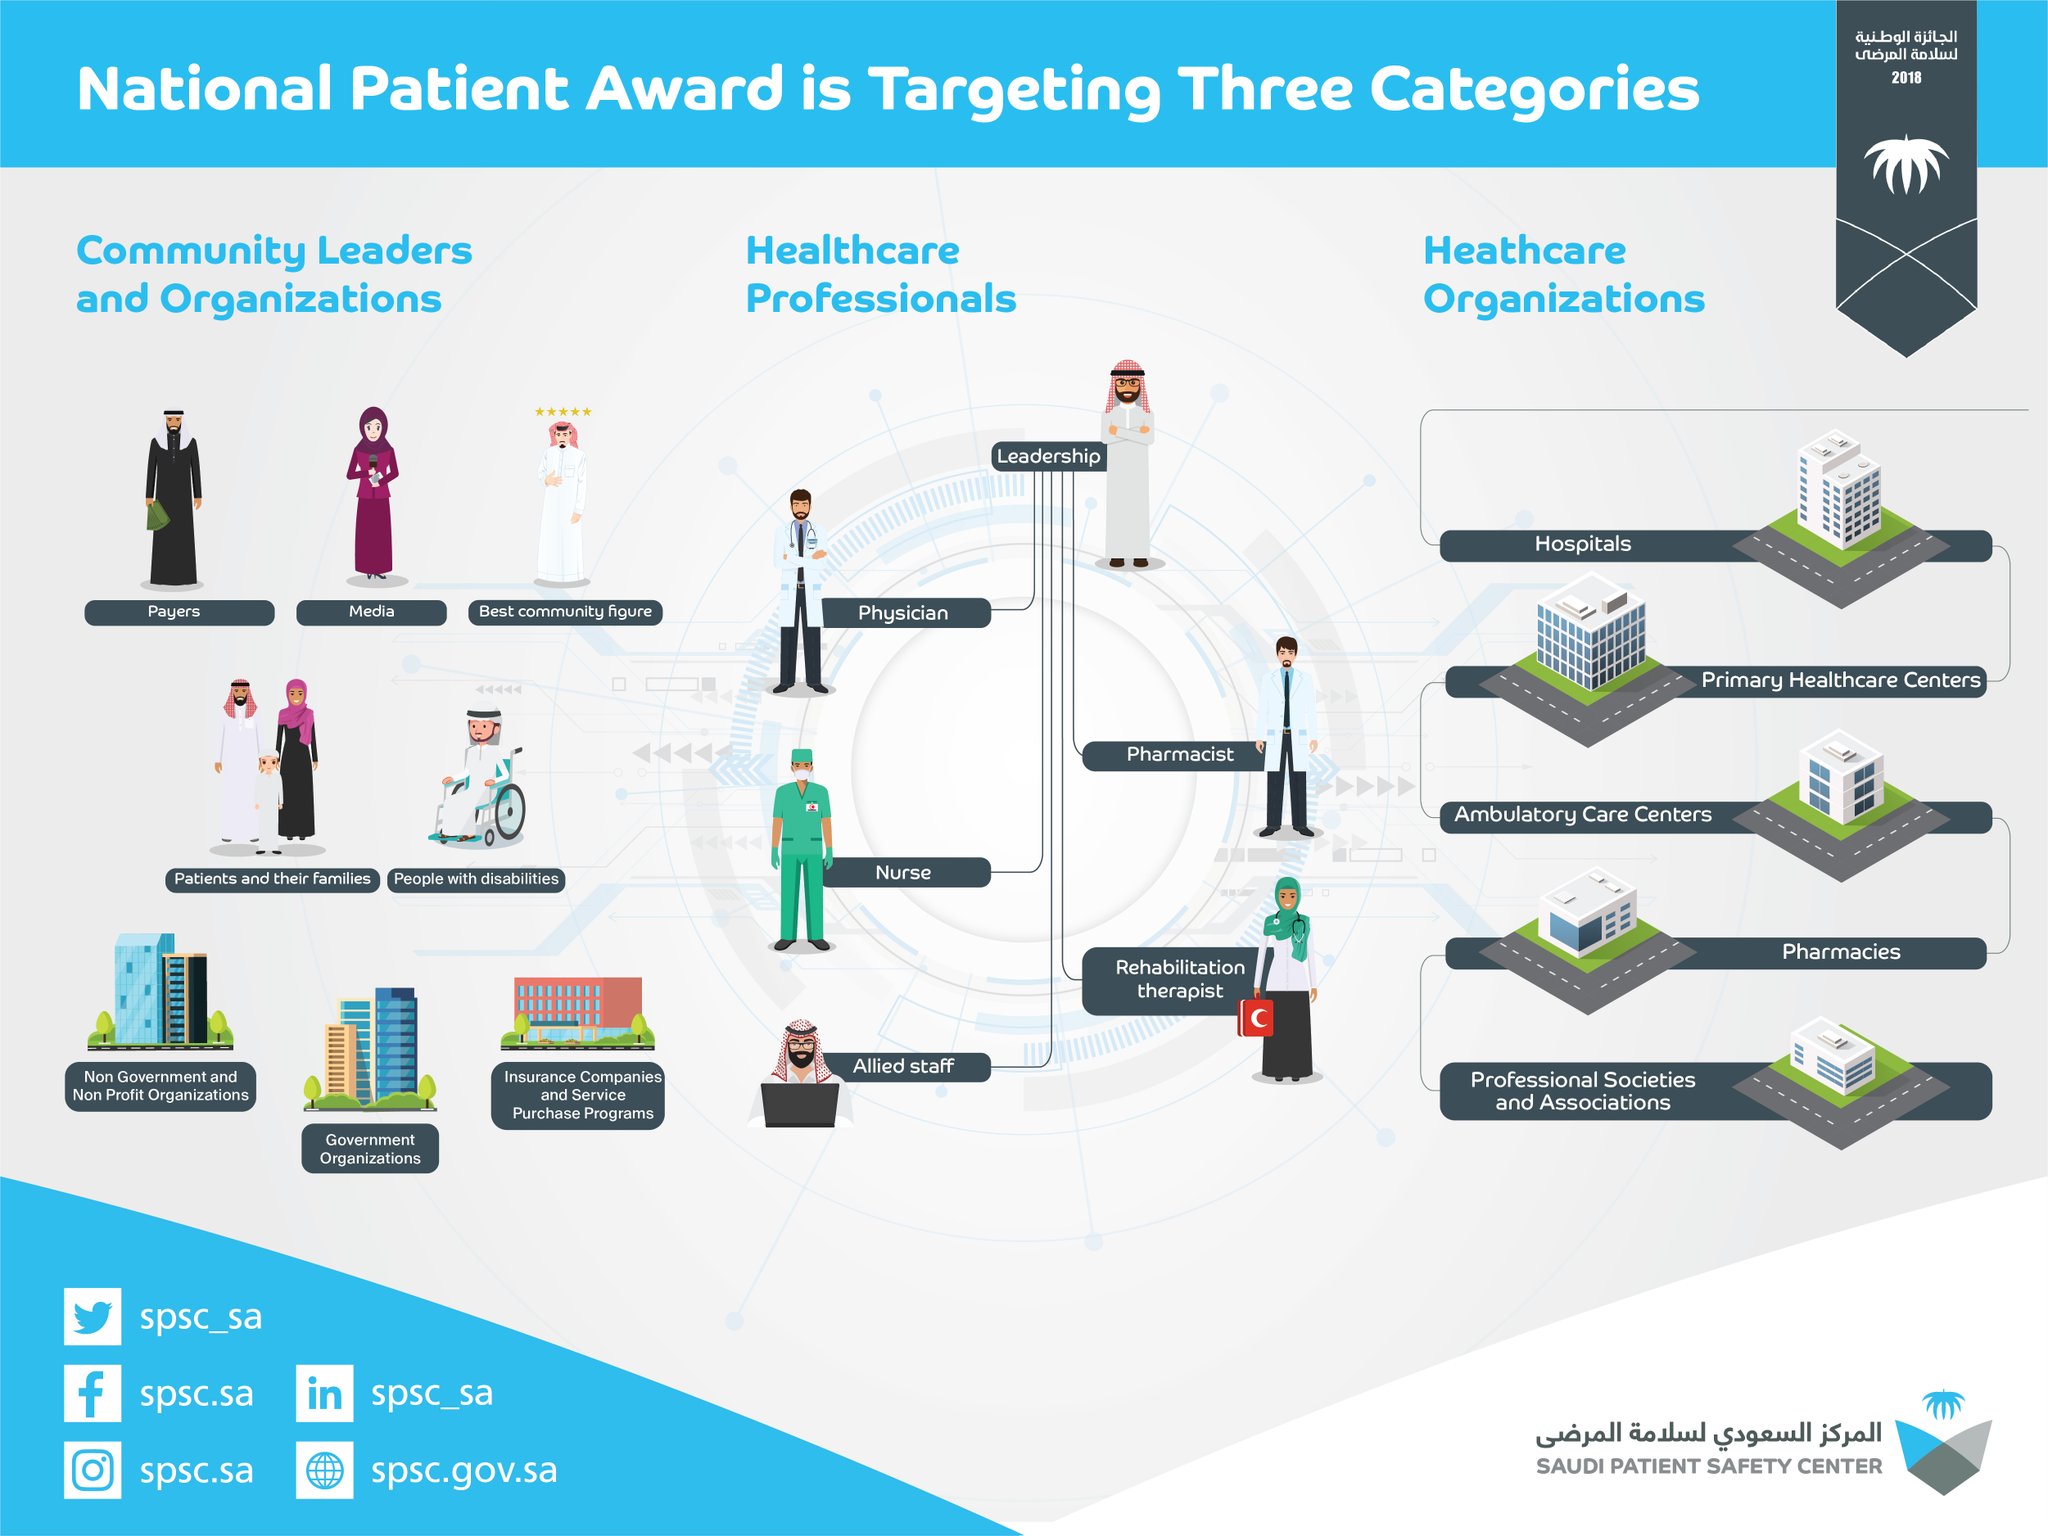 saudi patient safety center launches the National Award in its three categories